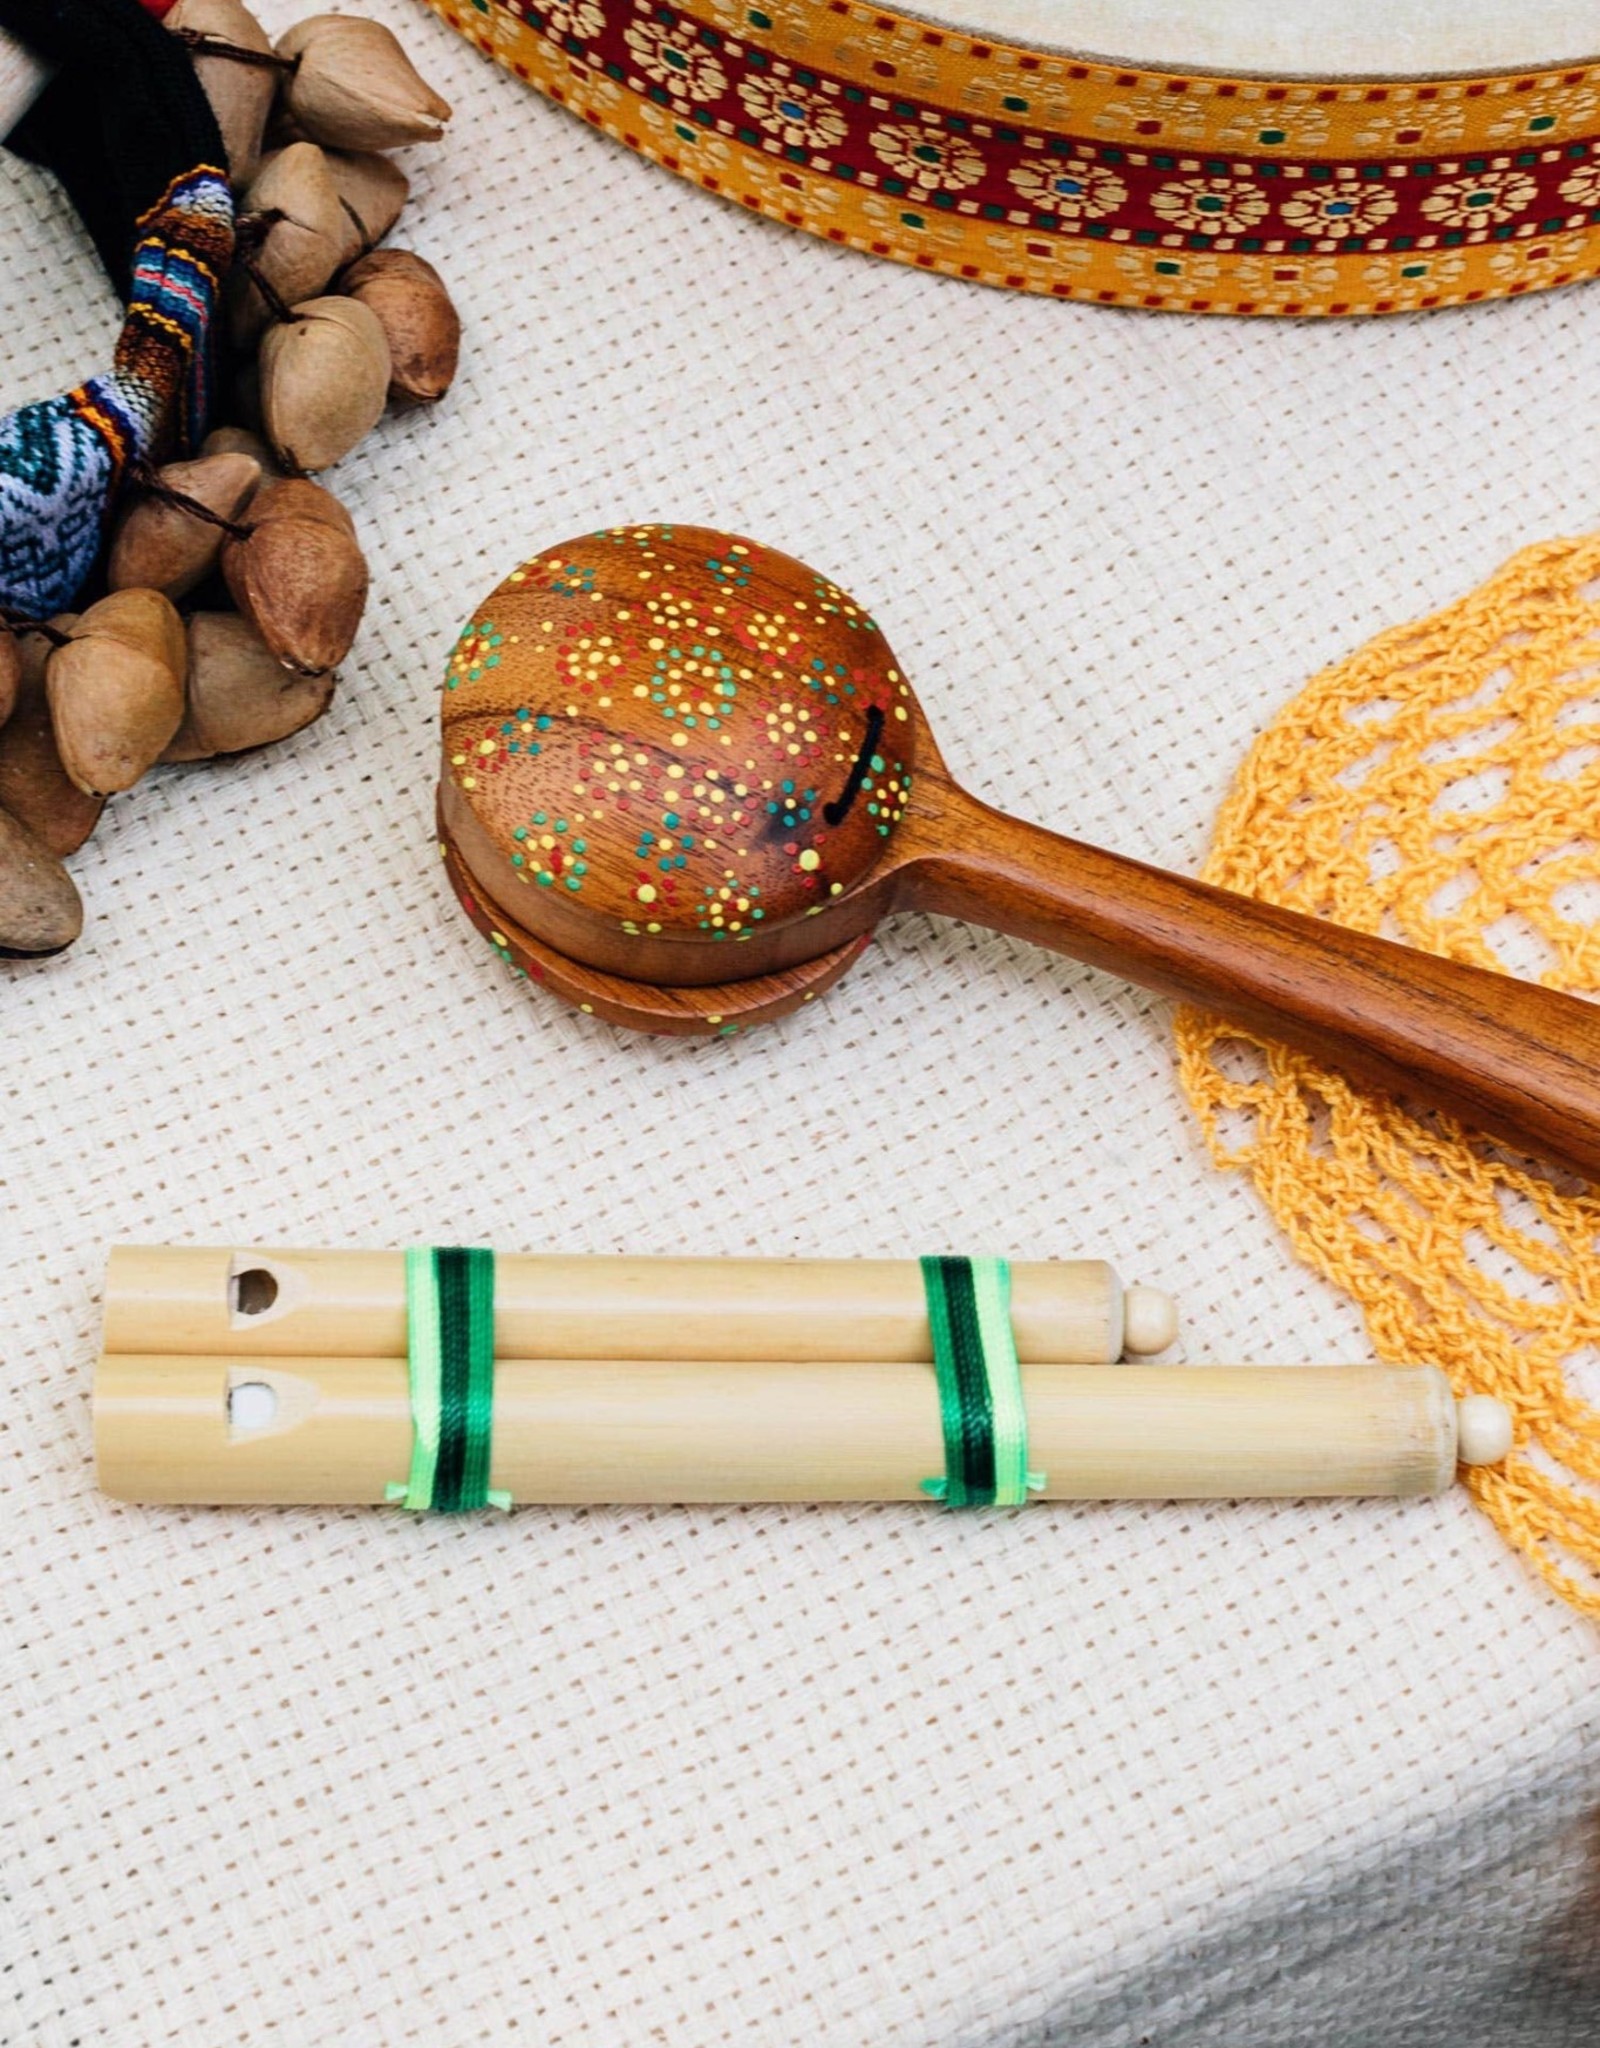 Ten Thousand Villages Reed Slide Whistle